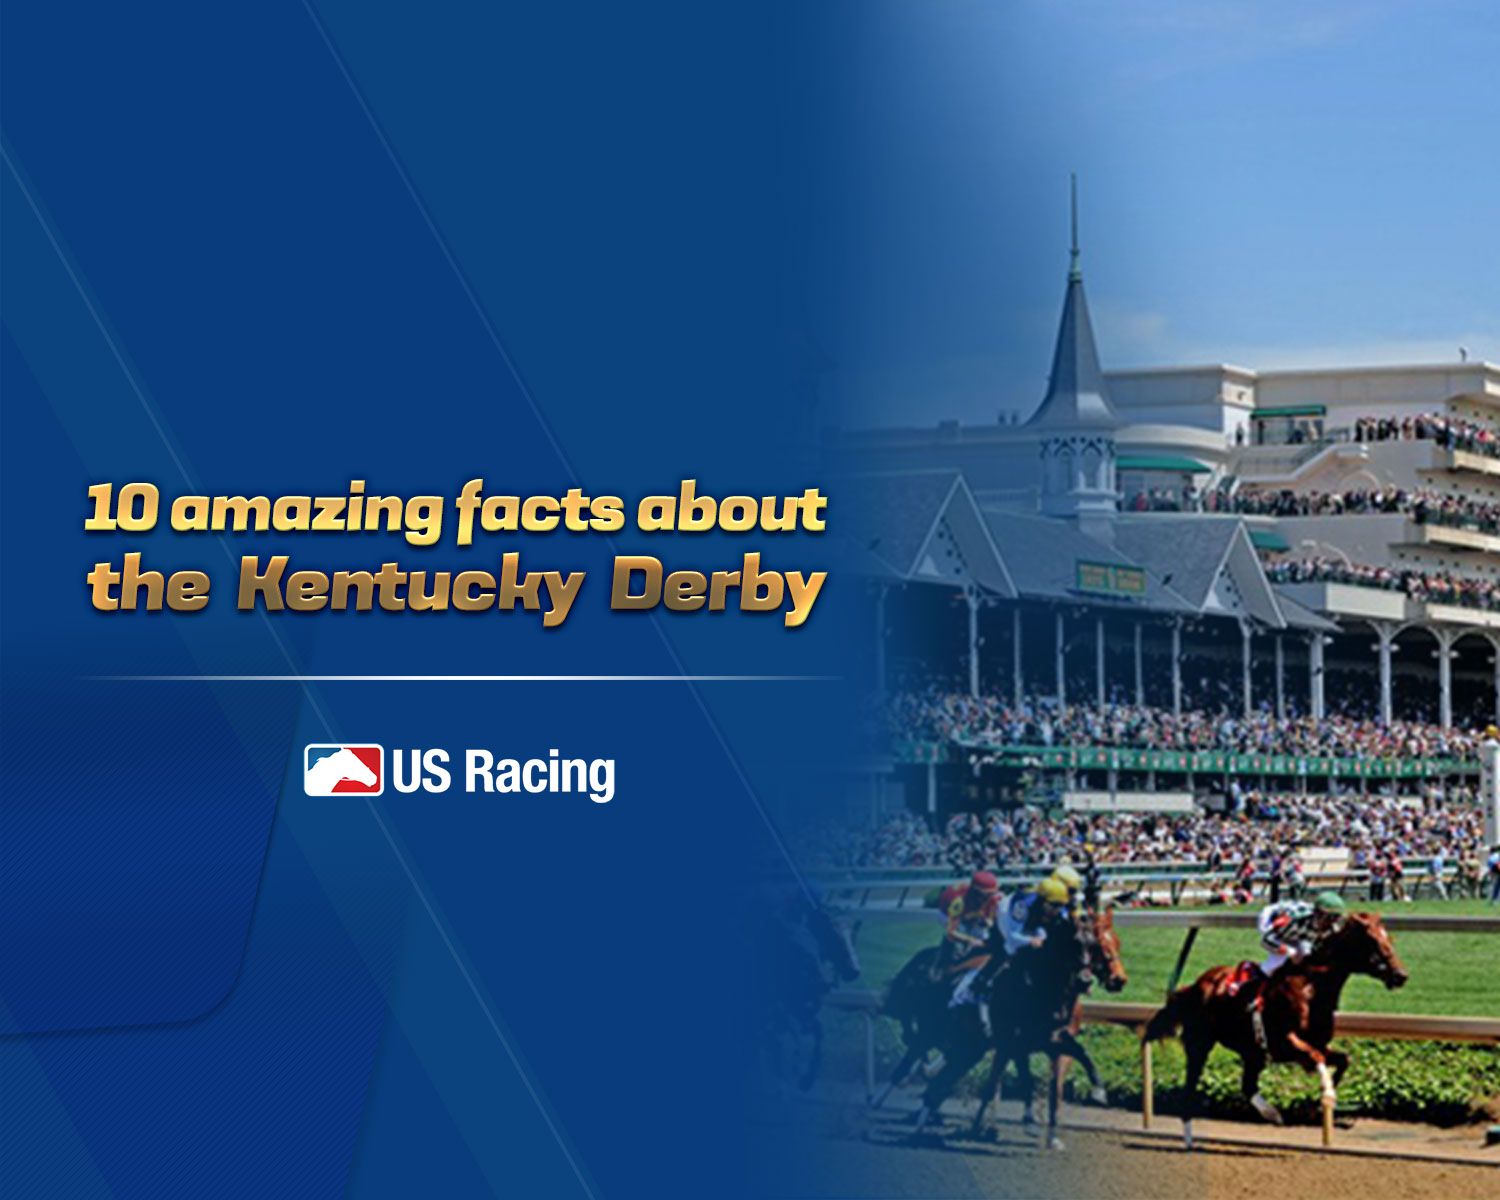 10 Amazing Facts About the Kentucky Derby, You Won’t Believe 6